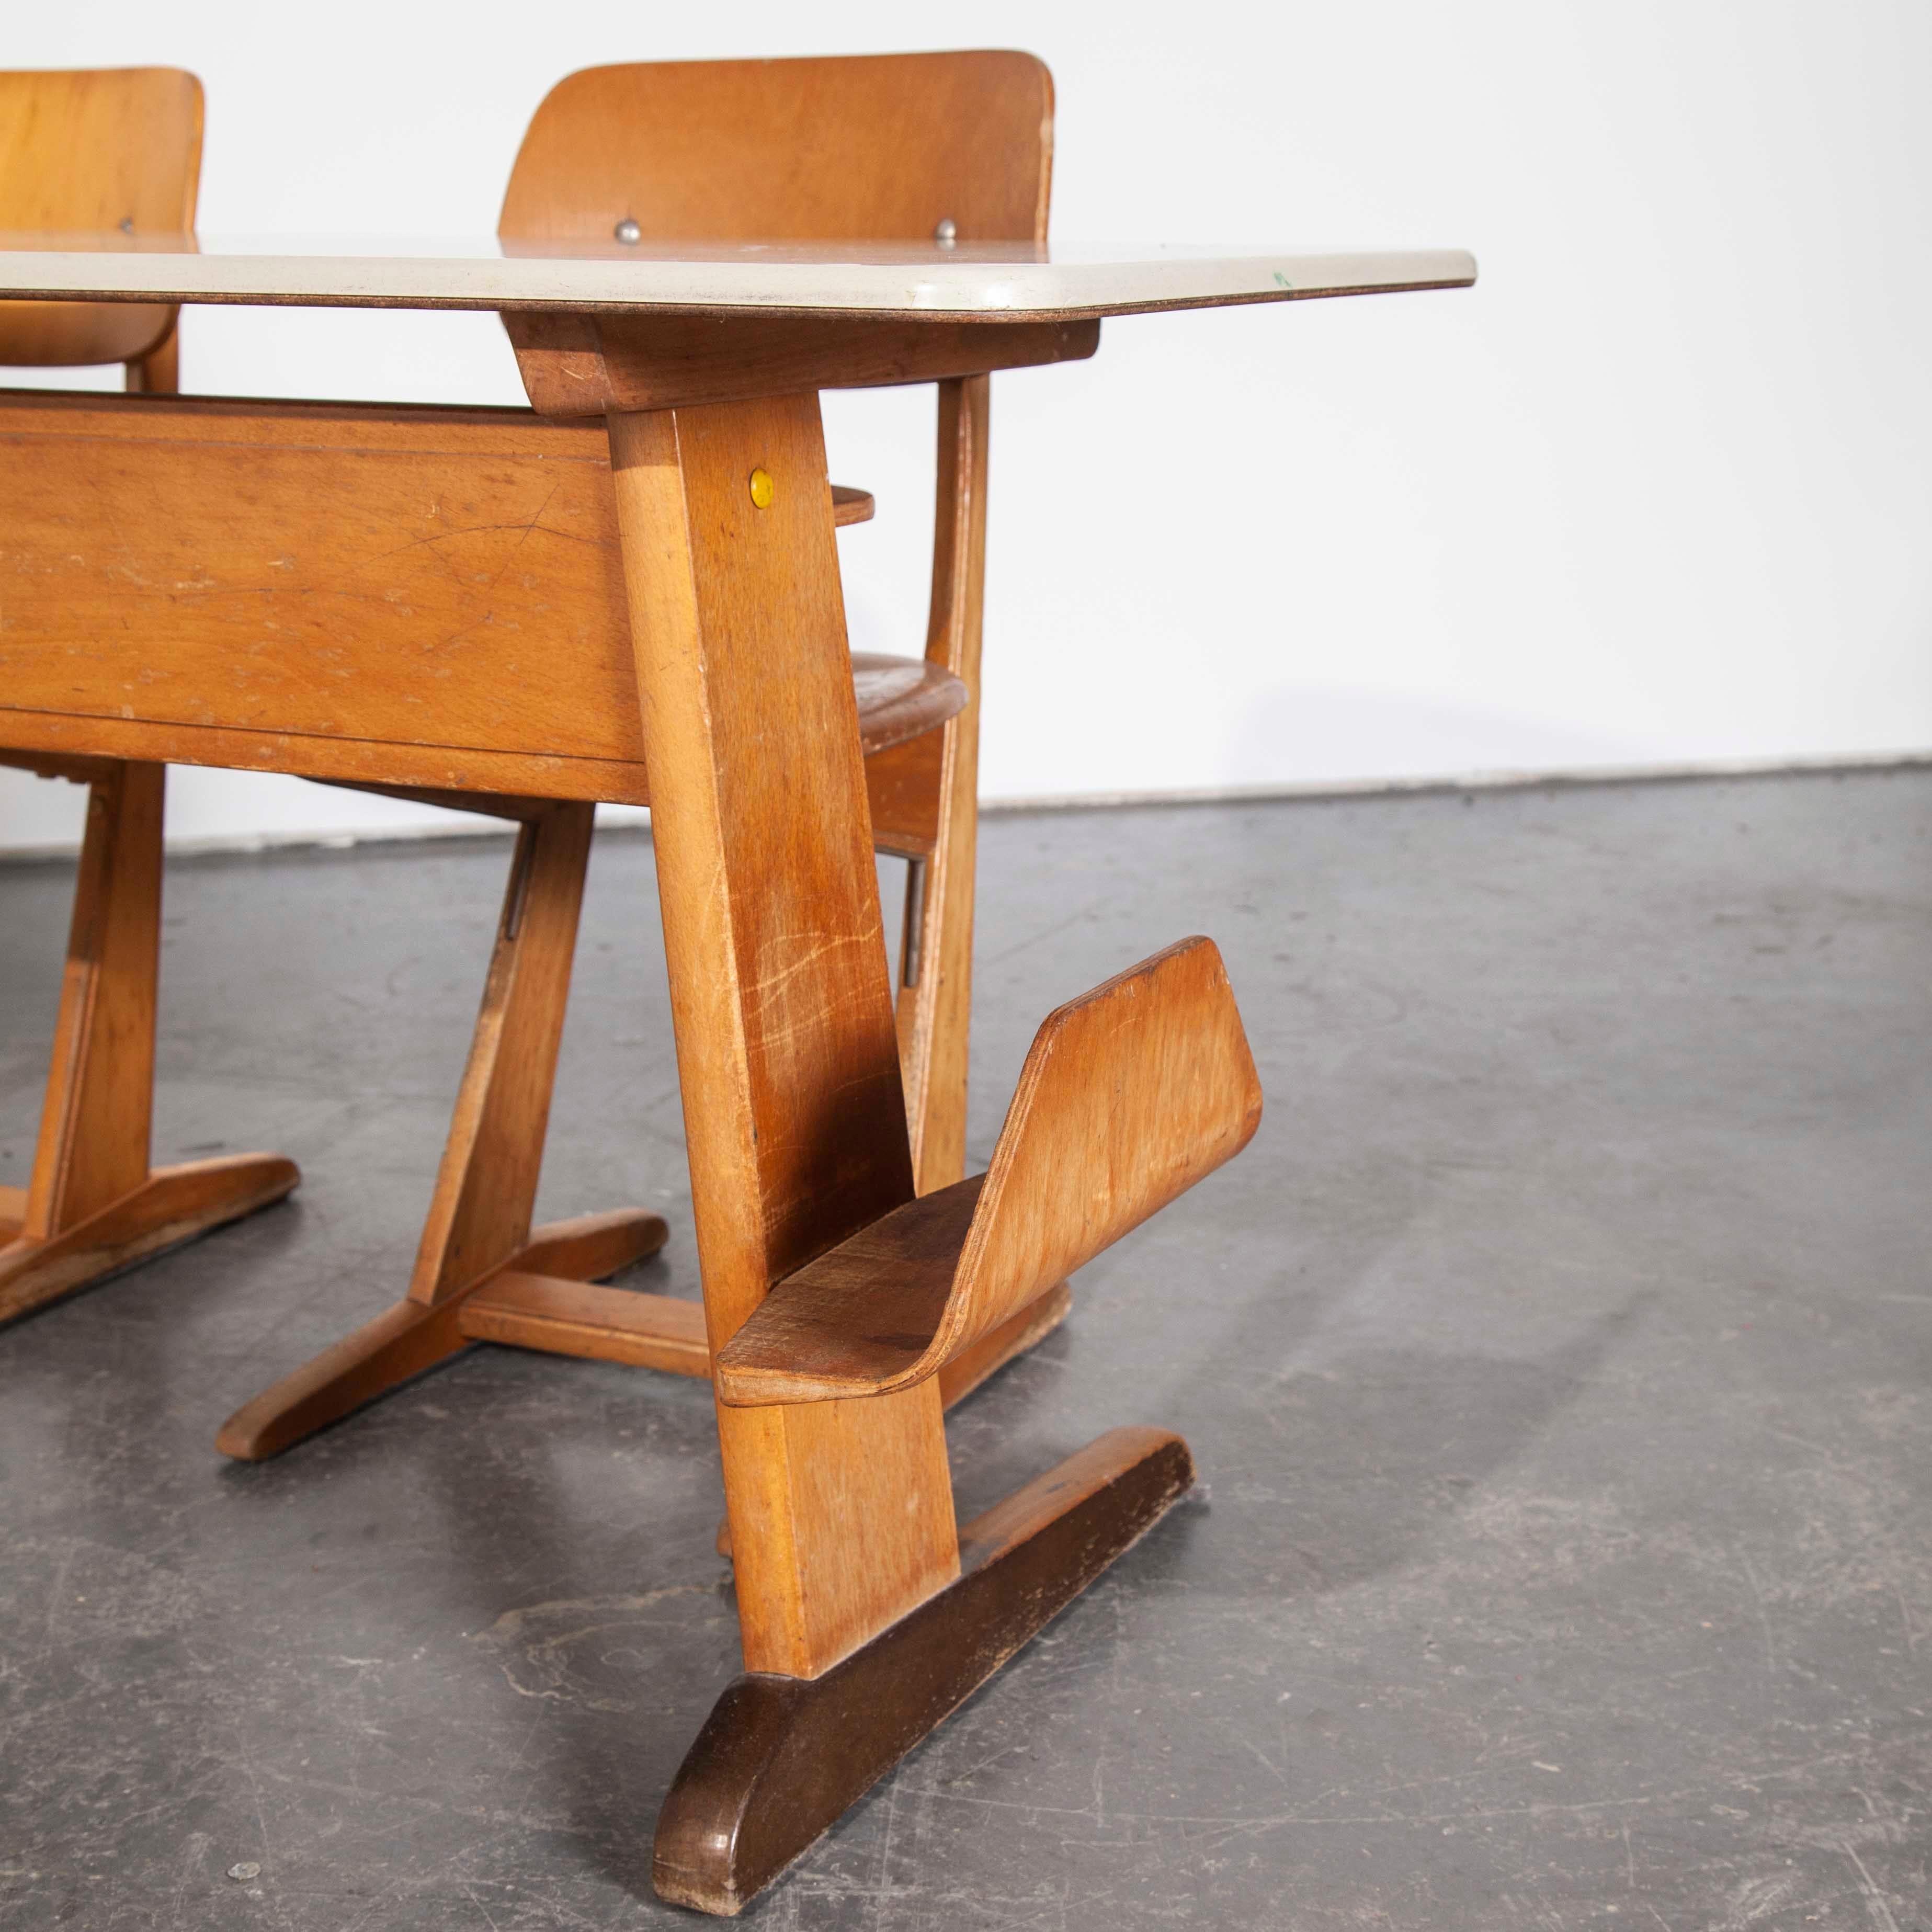 1960s Casala Children’s desk and chair set. Casala is one of Germanys best known furniture producers still producing to this day. In our view the 1960s was their heyday. These practical slightly Scandi school desks/tables are great fun and are sold